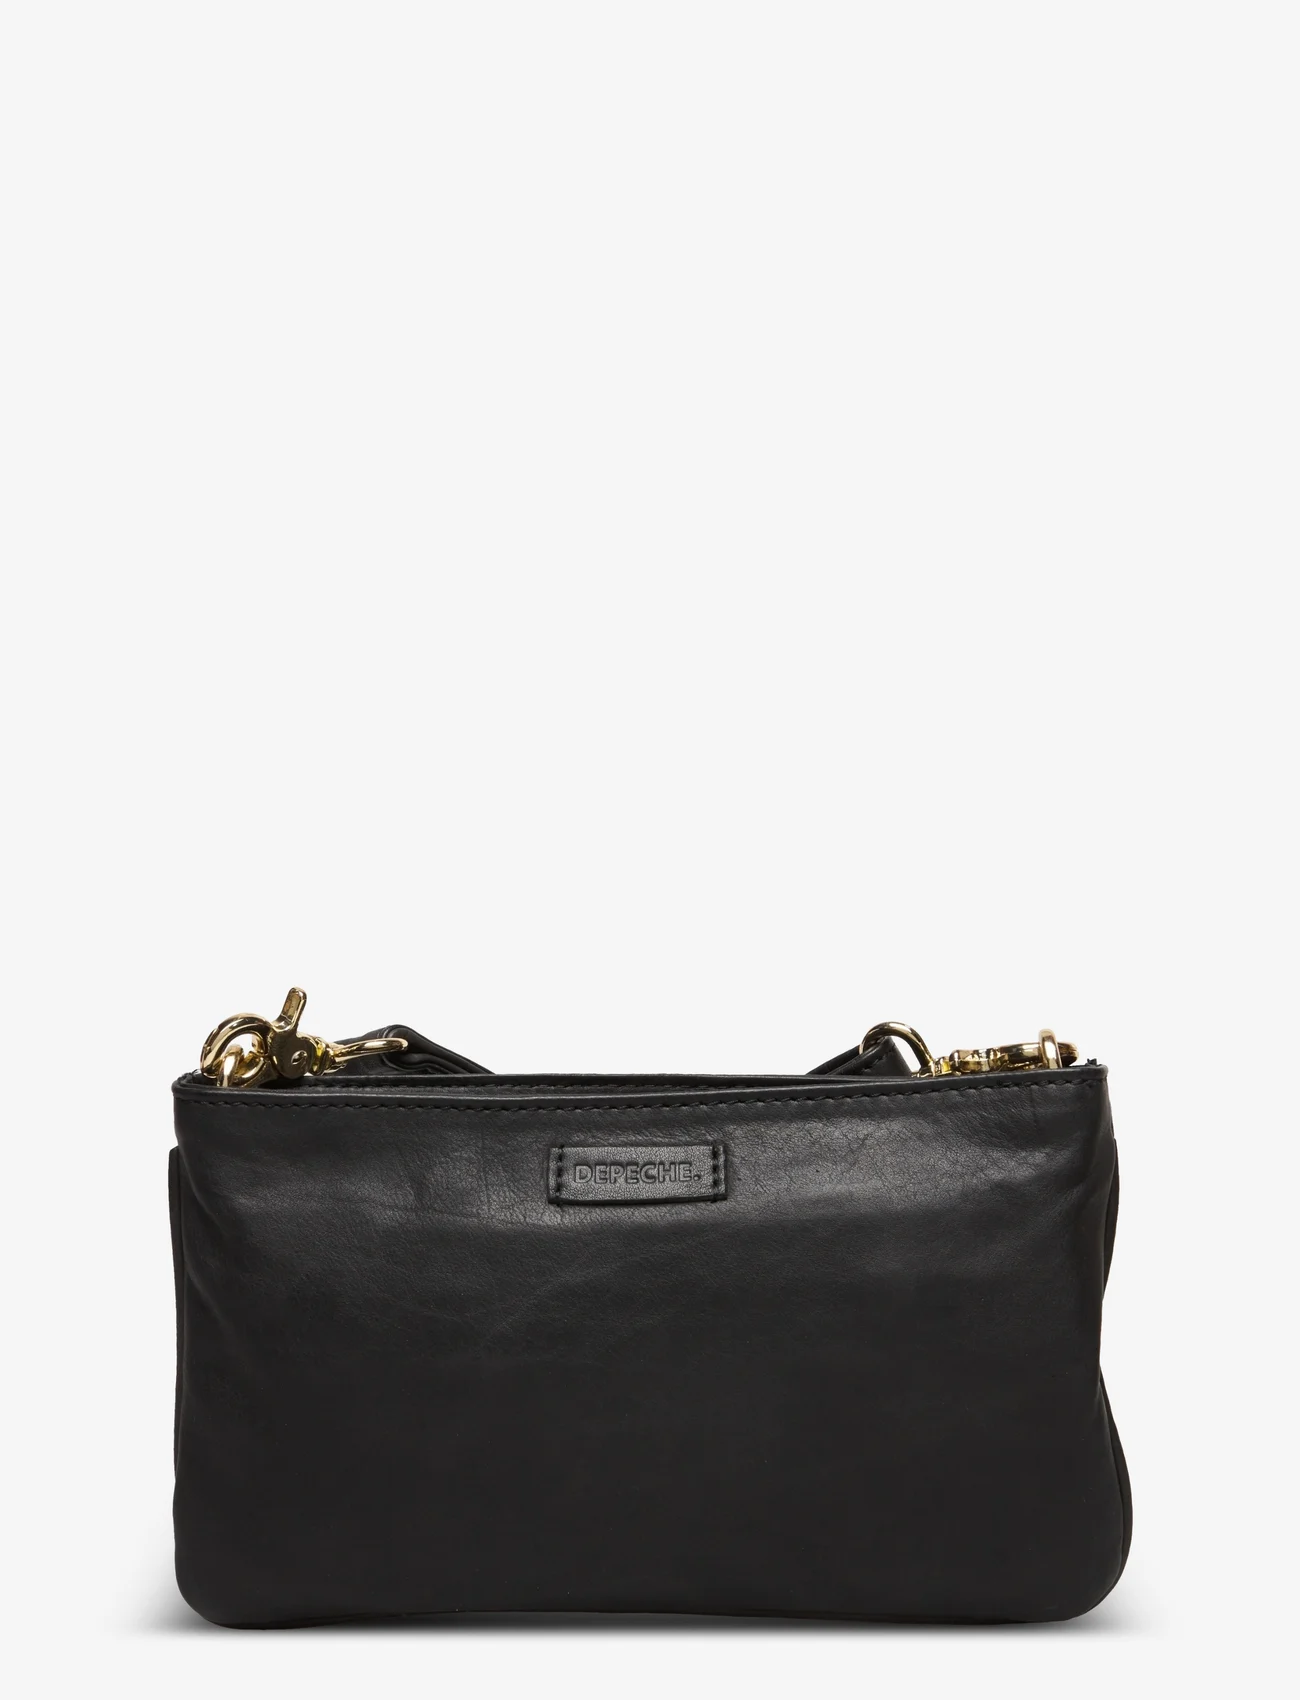 DEPECHE - Small bag / Clutch - peoriided outlet-hindadega - black - 1